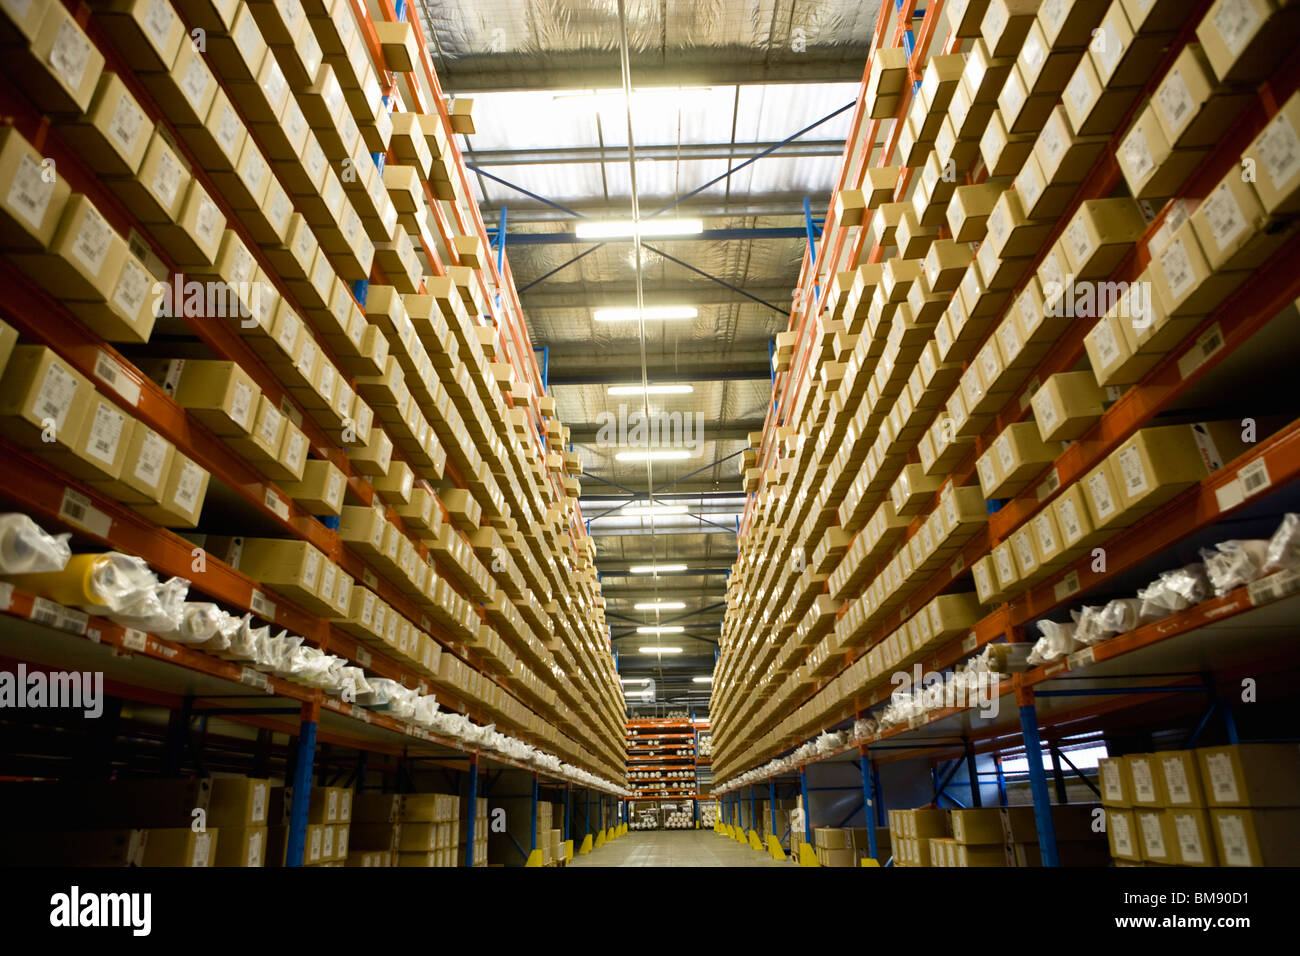 Warehouse stocked with coated textile products Stock Photo